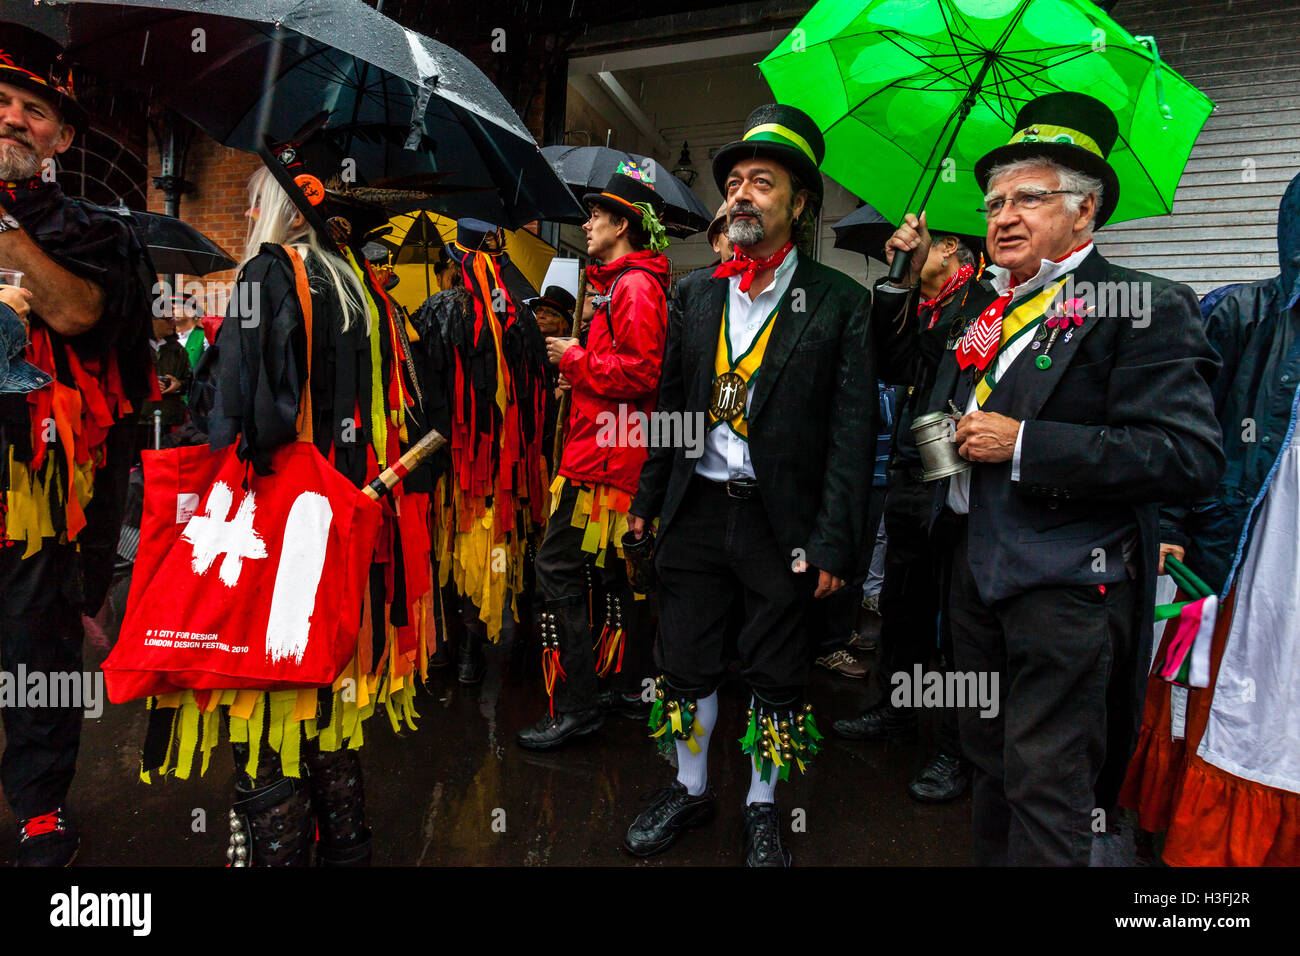 Morris Dancers Stand In The Rain Waiting To Perform In The 'Dancing In The Old' Event Held At Harvey's Brewery, Lewes, UK Stock Photo